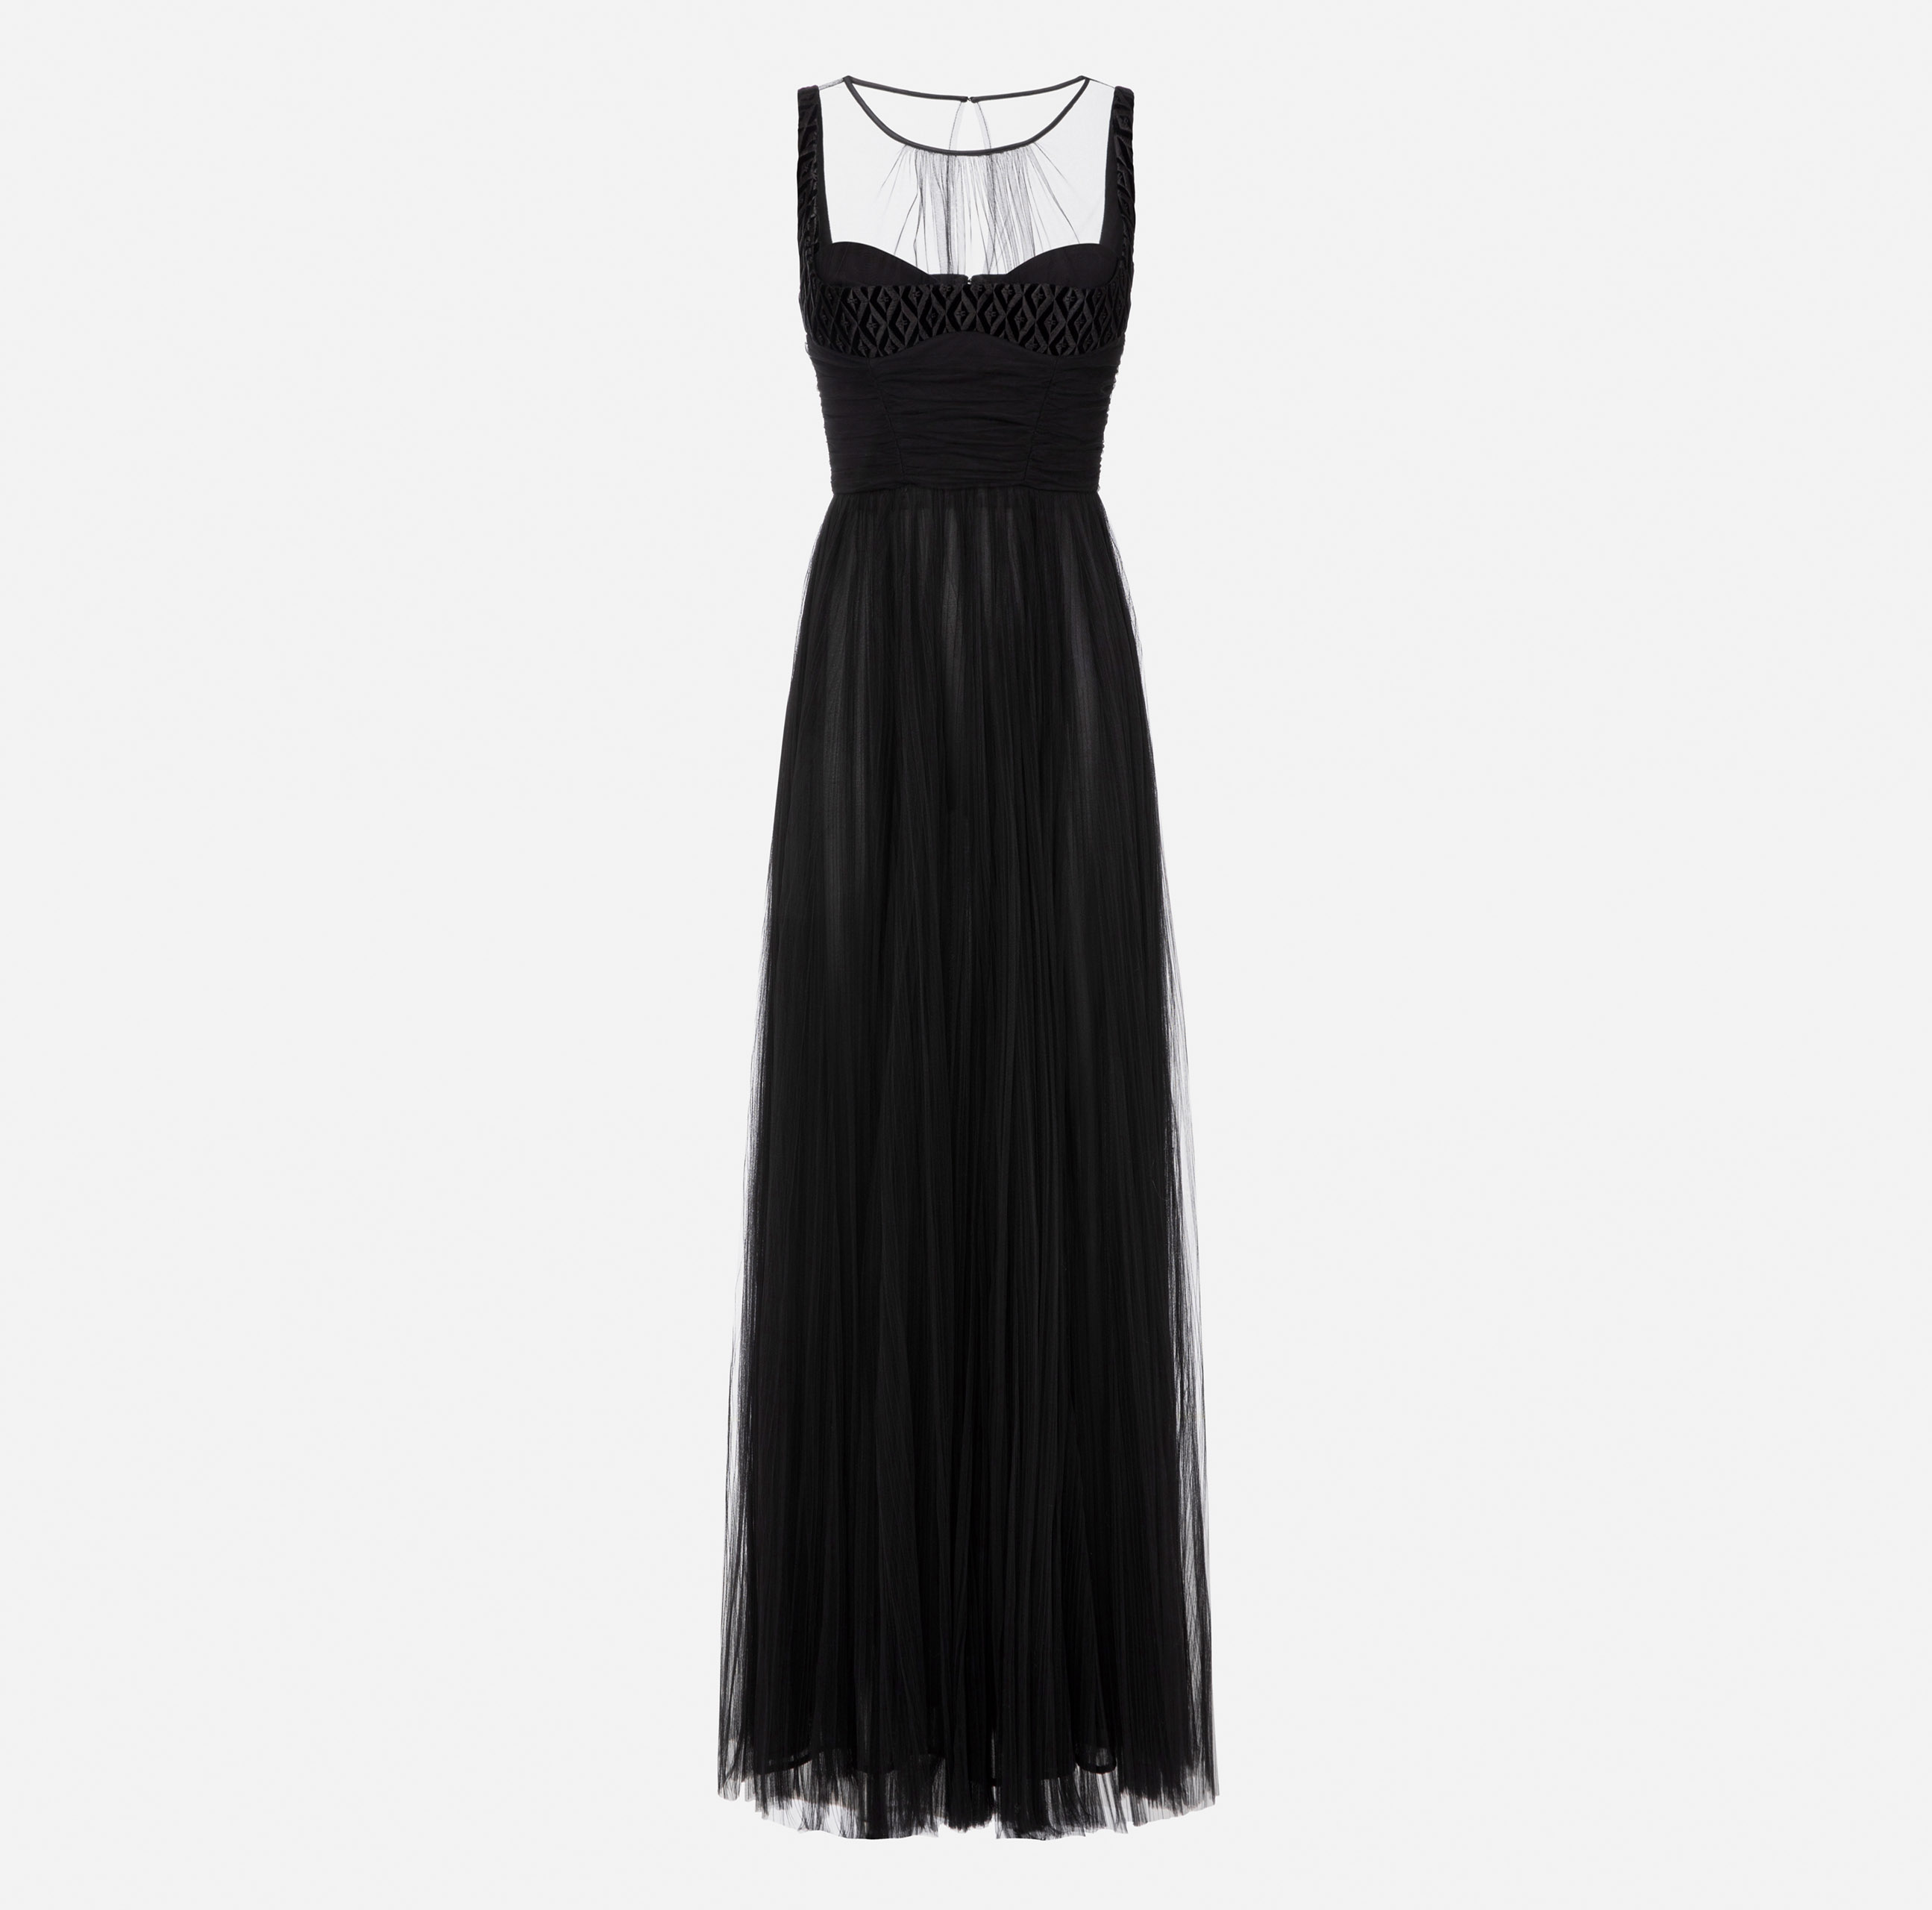 Red Carpet dress in pleated tulle fabric | Elisabetta Franchi